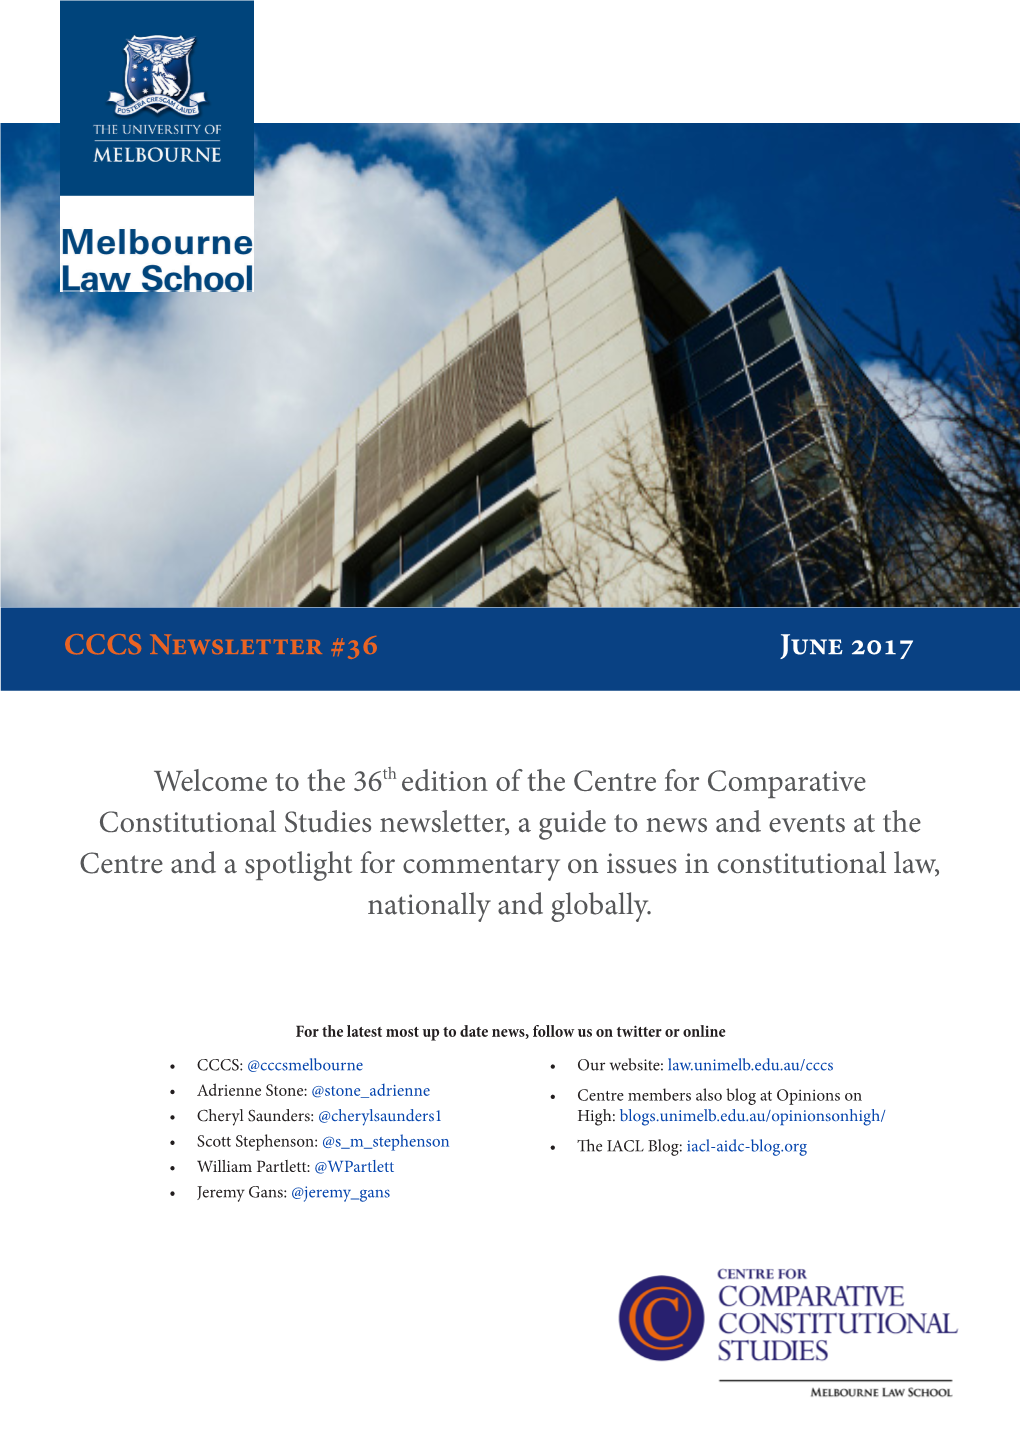 CCCS Newsletter #36 June 2017 Welcome to the 36Th Edition of the Centre for Comparative Constitutional Studies Newsletter, A